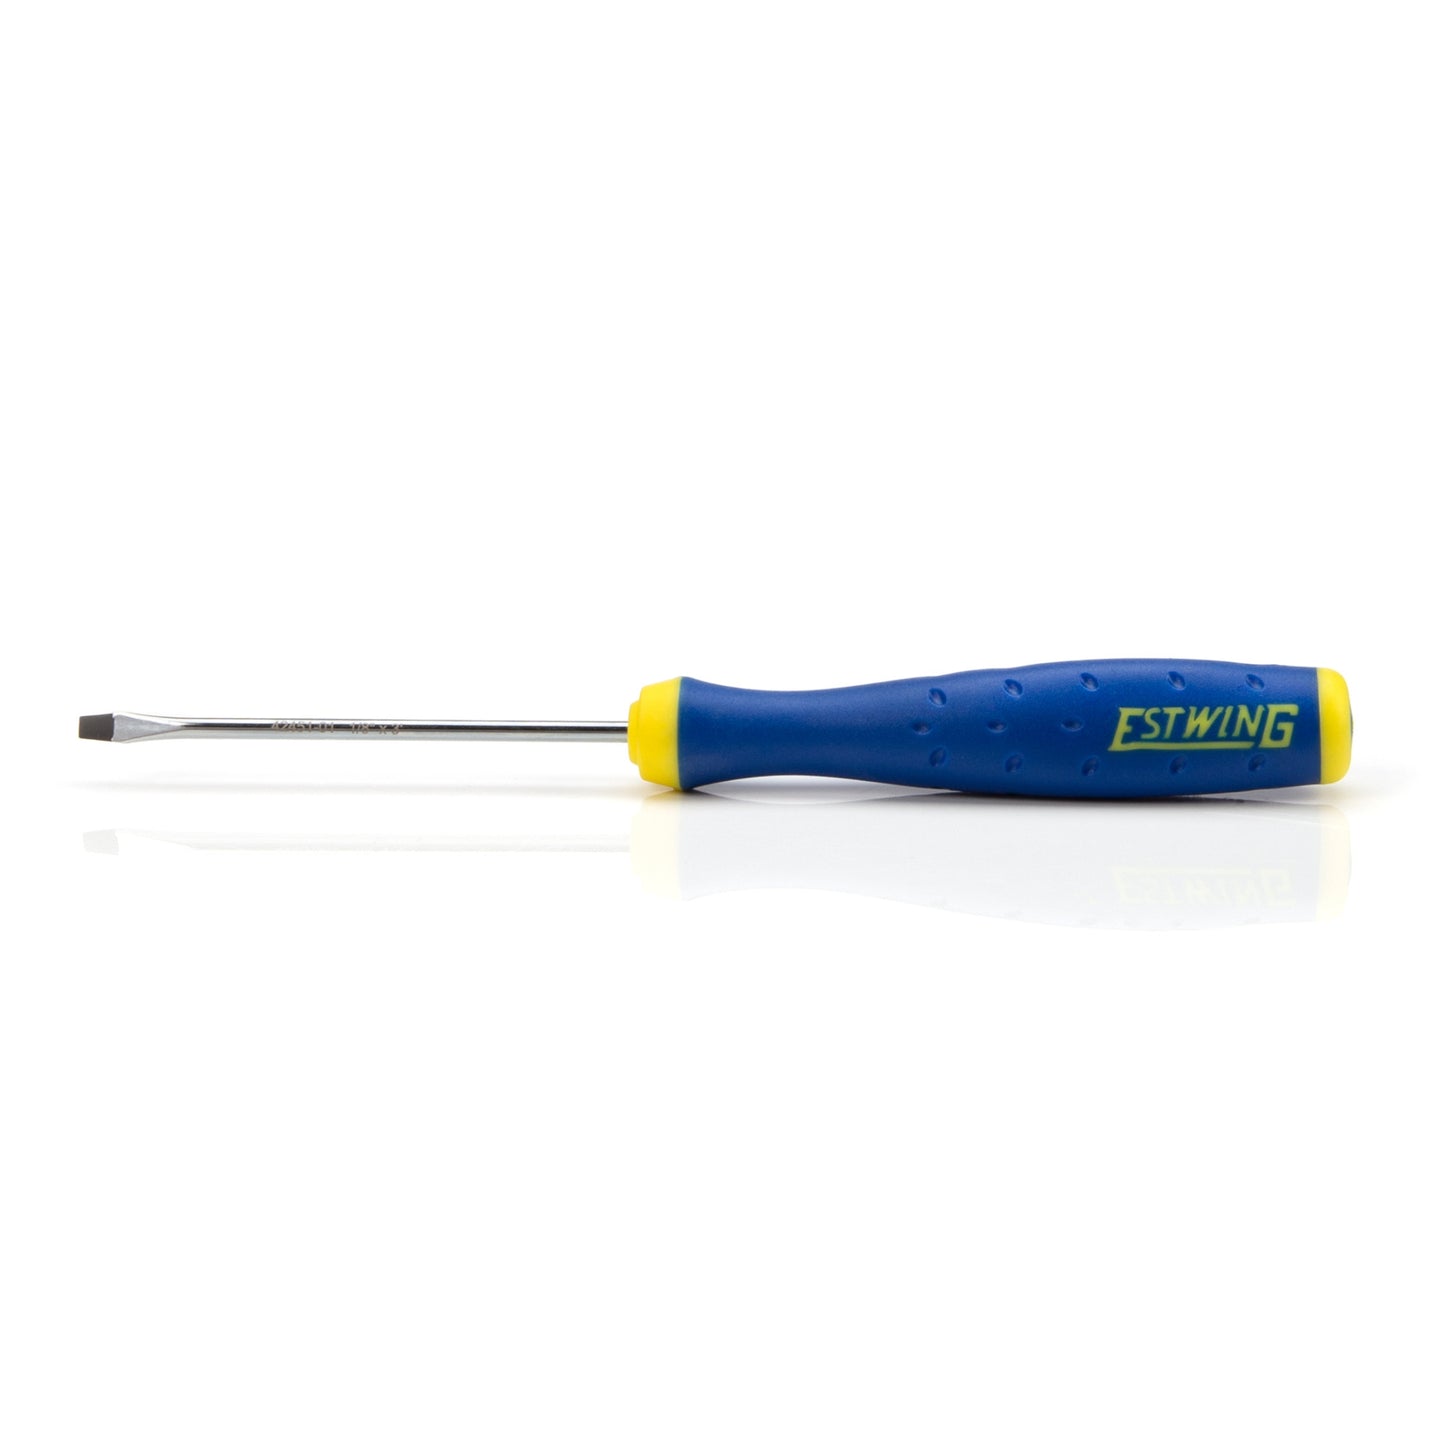 1/8-Inch x 3-Inch Magnetic Slotted Tip Precision Screwdriver with Ergonomic Handle